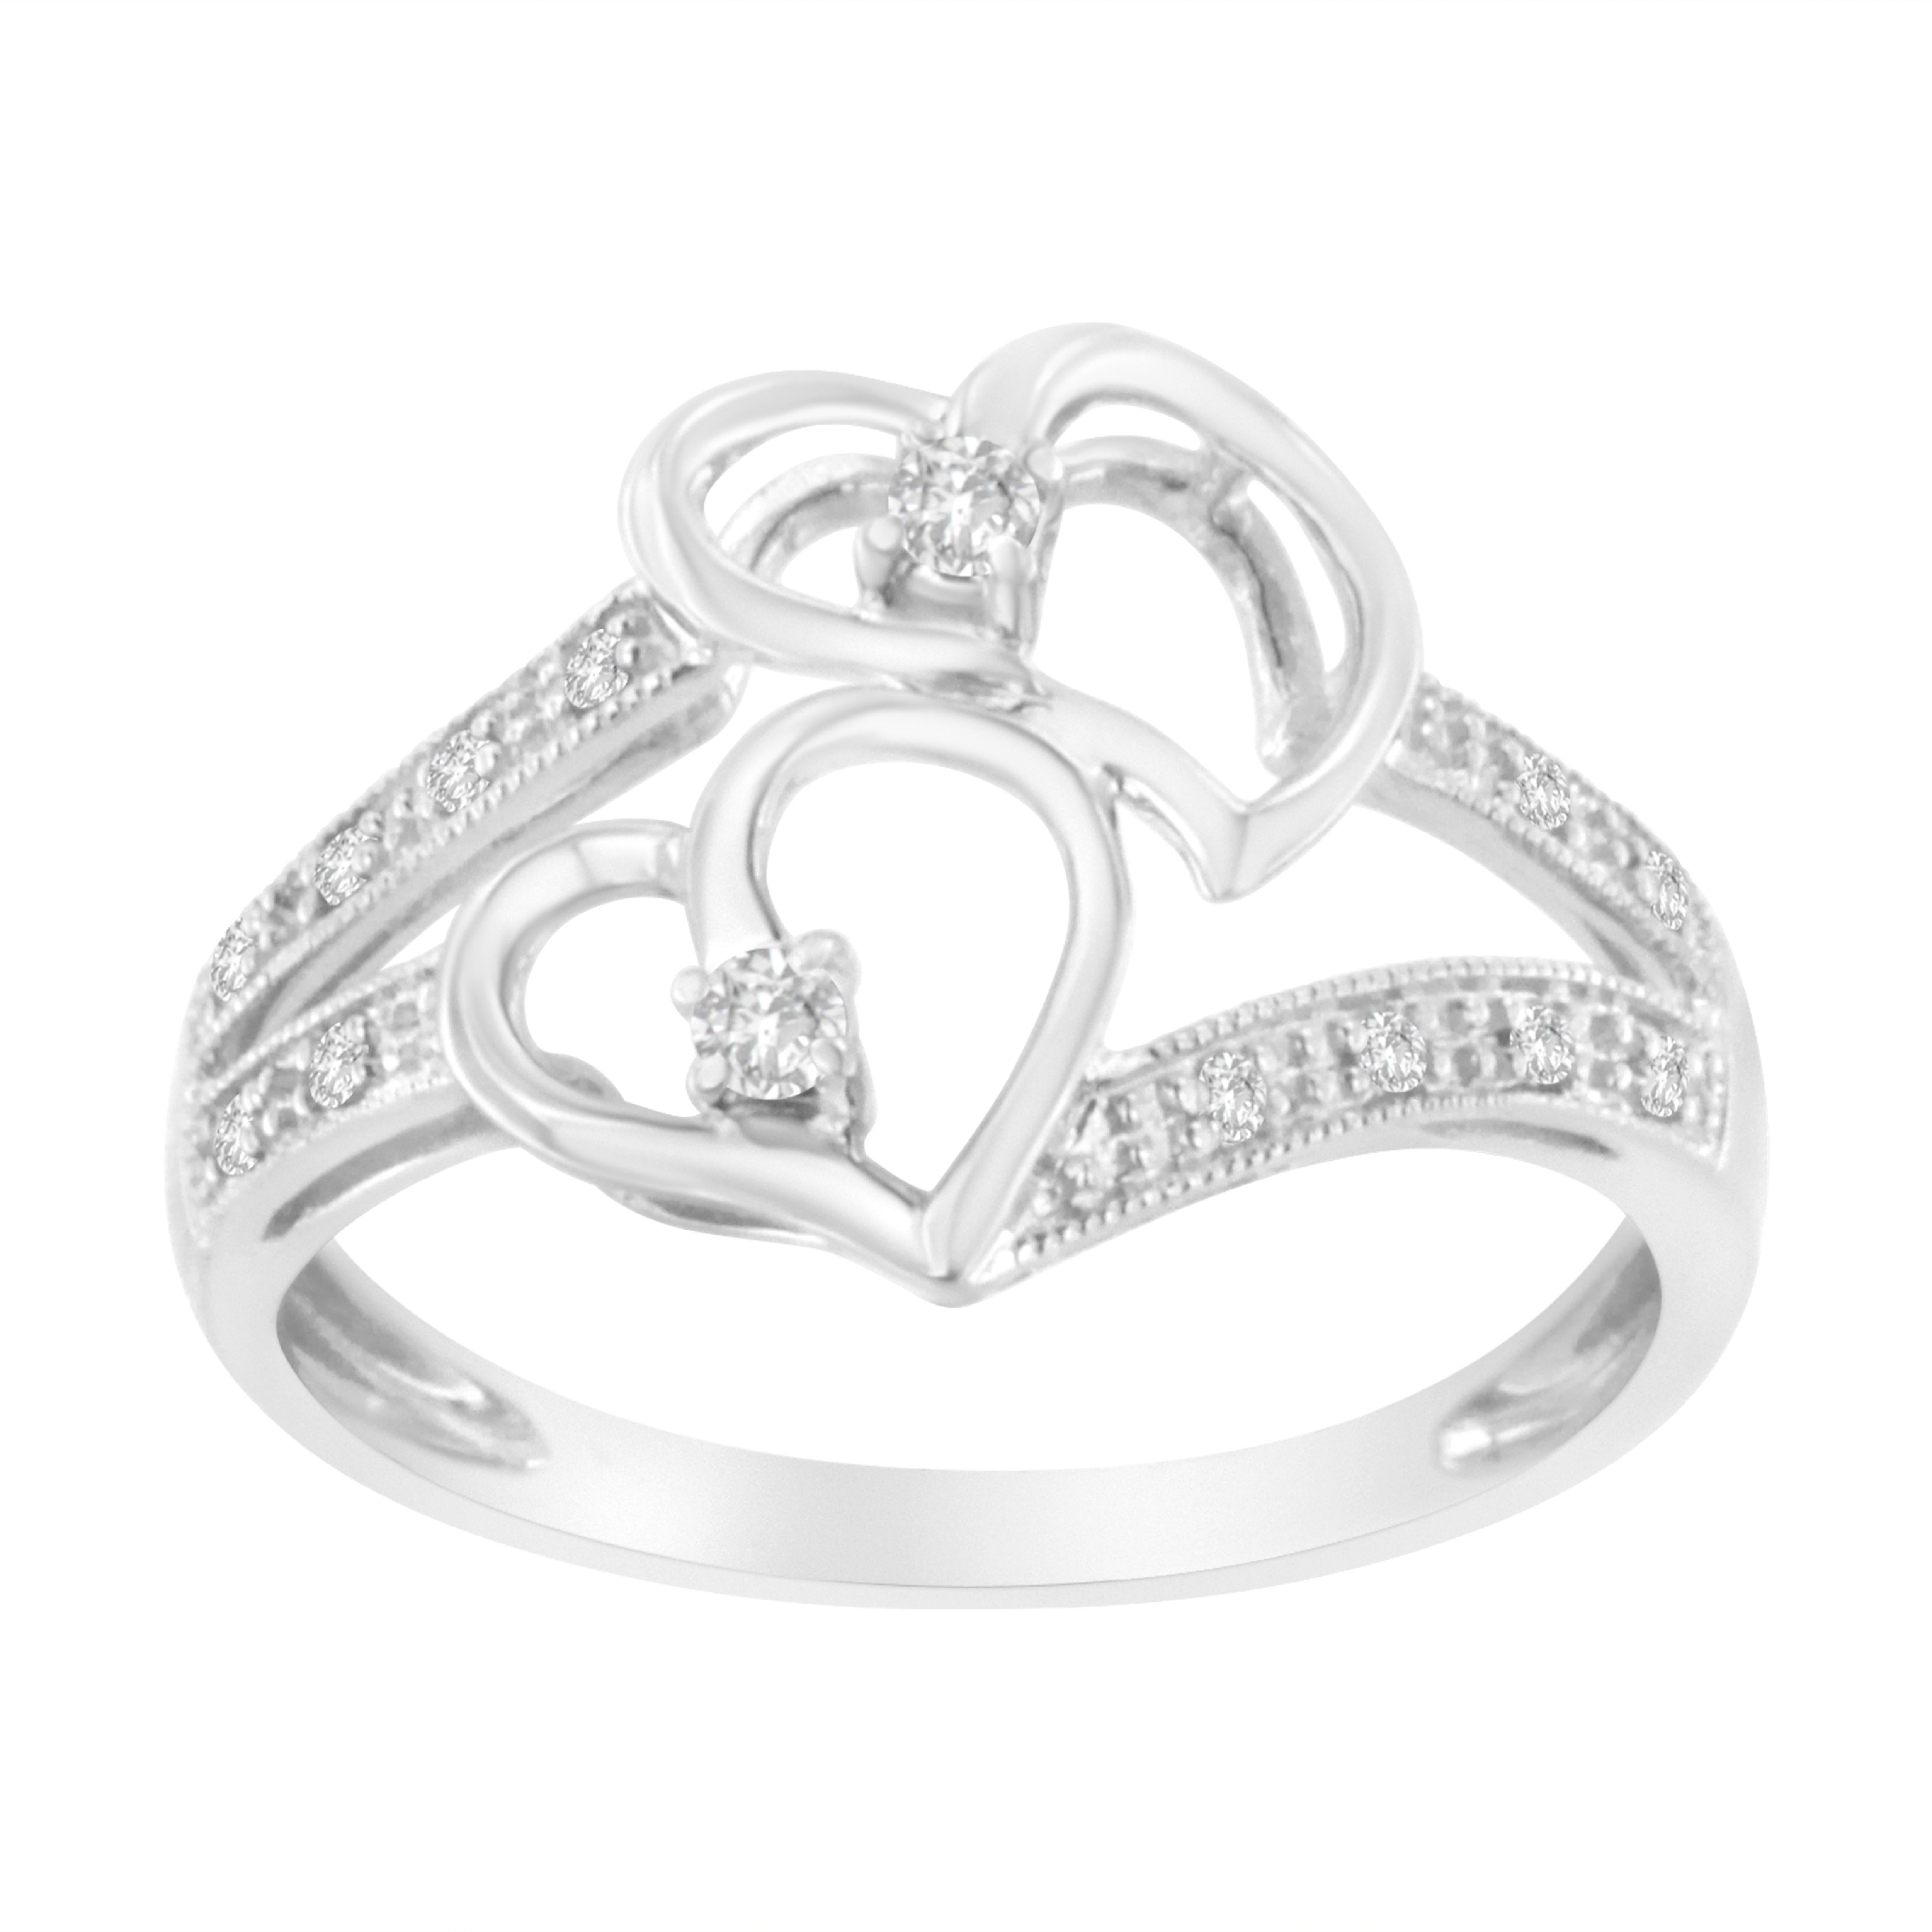 Celebrate your magical love moments with this resplendent milgrain finished Twin Heart Diamond Ring. This captivating ring showcases two open hearts adorn with 2 gorgeous round cut diamonds and shank is embellished with 12 round cut accented